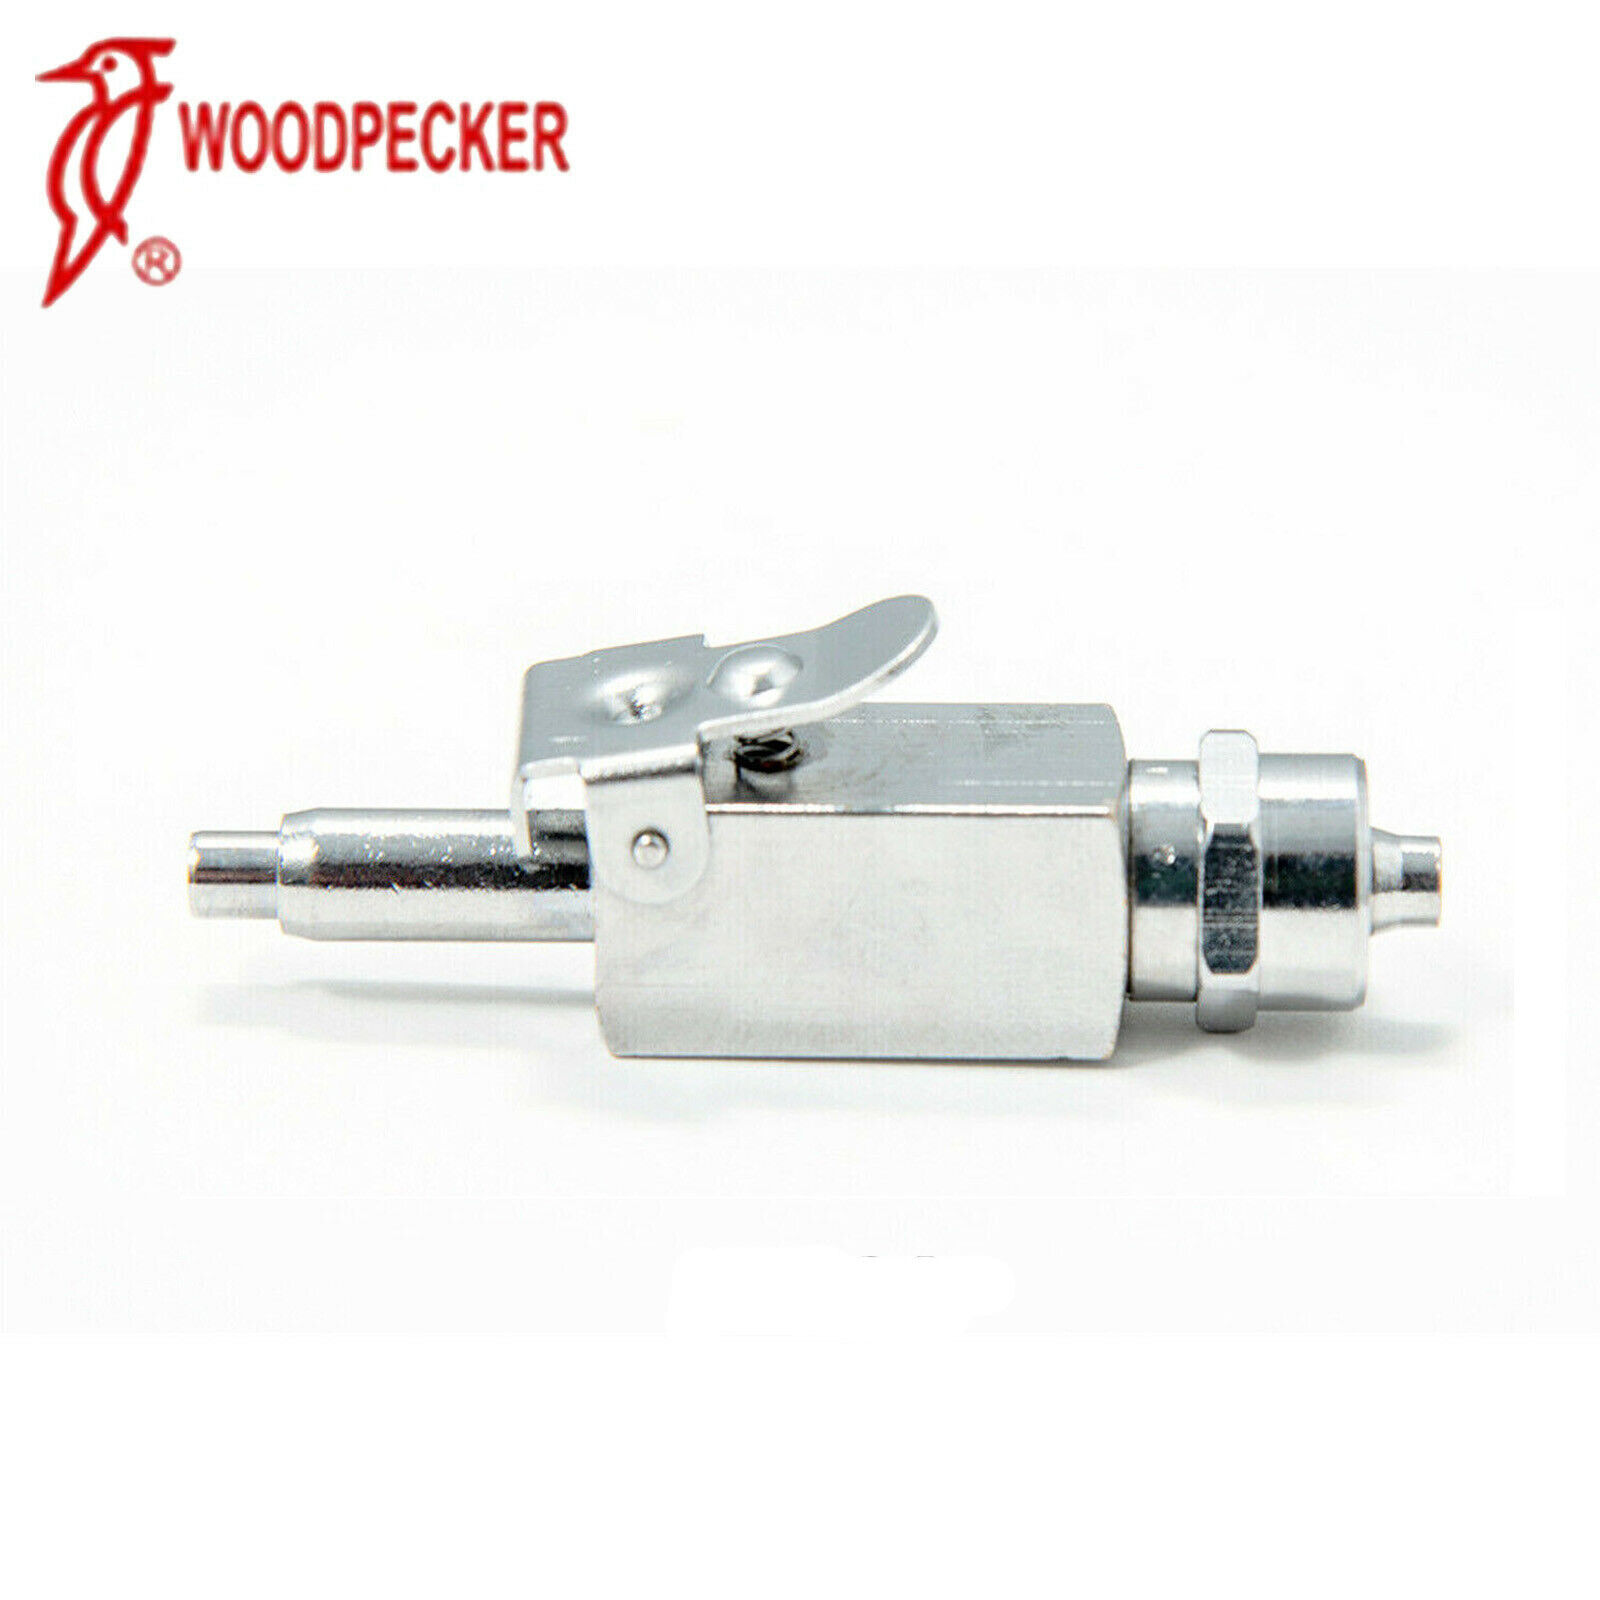 Original Woodpecker Dental Air Water Quick Connector for Ultrasonic Scalers USA